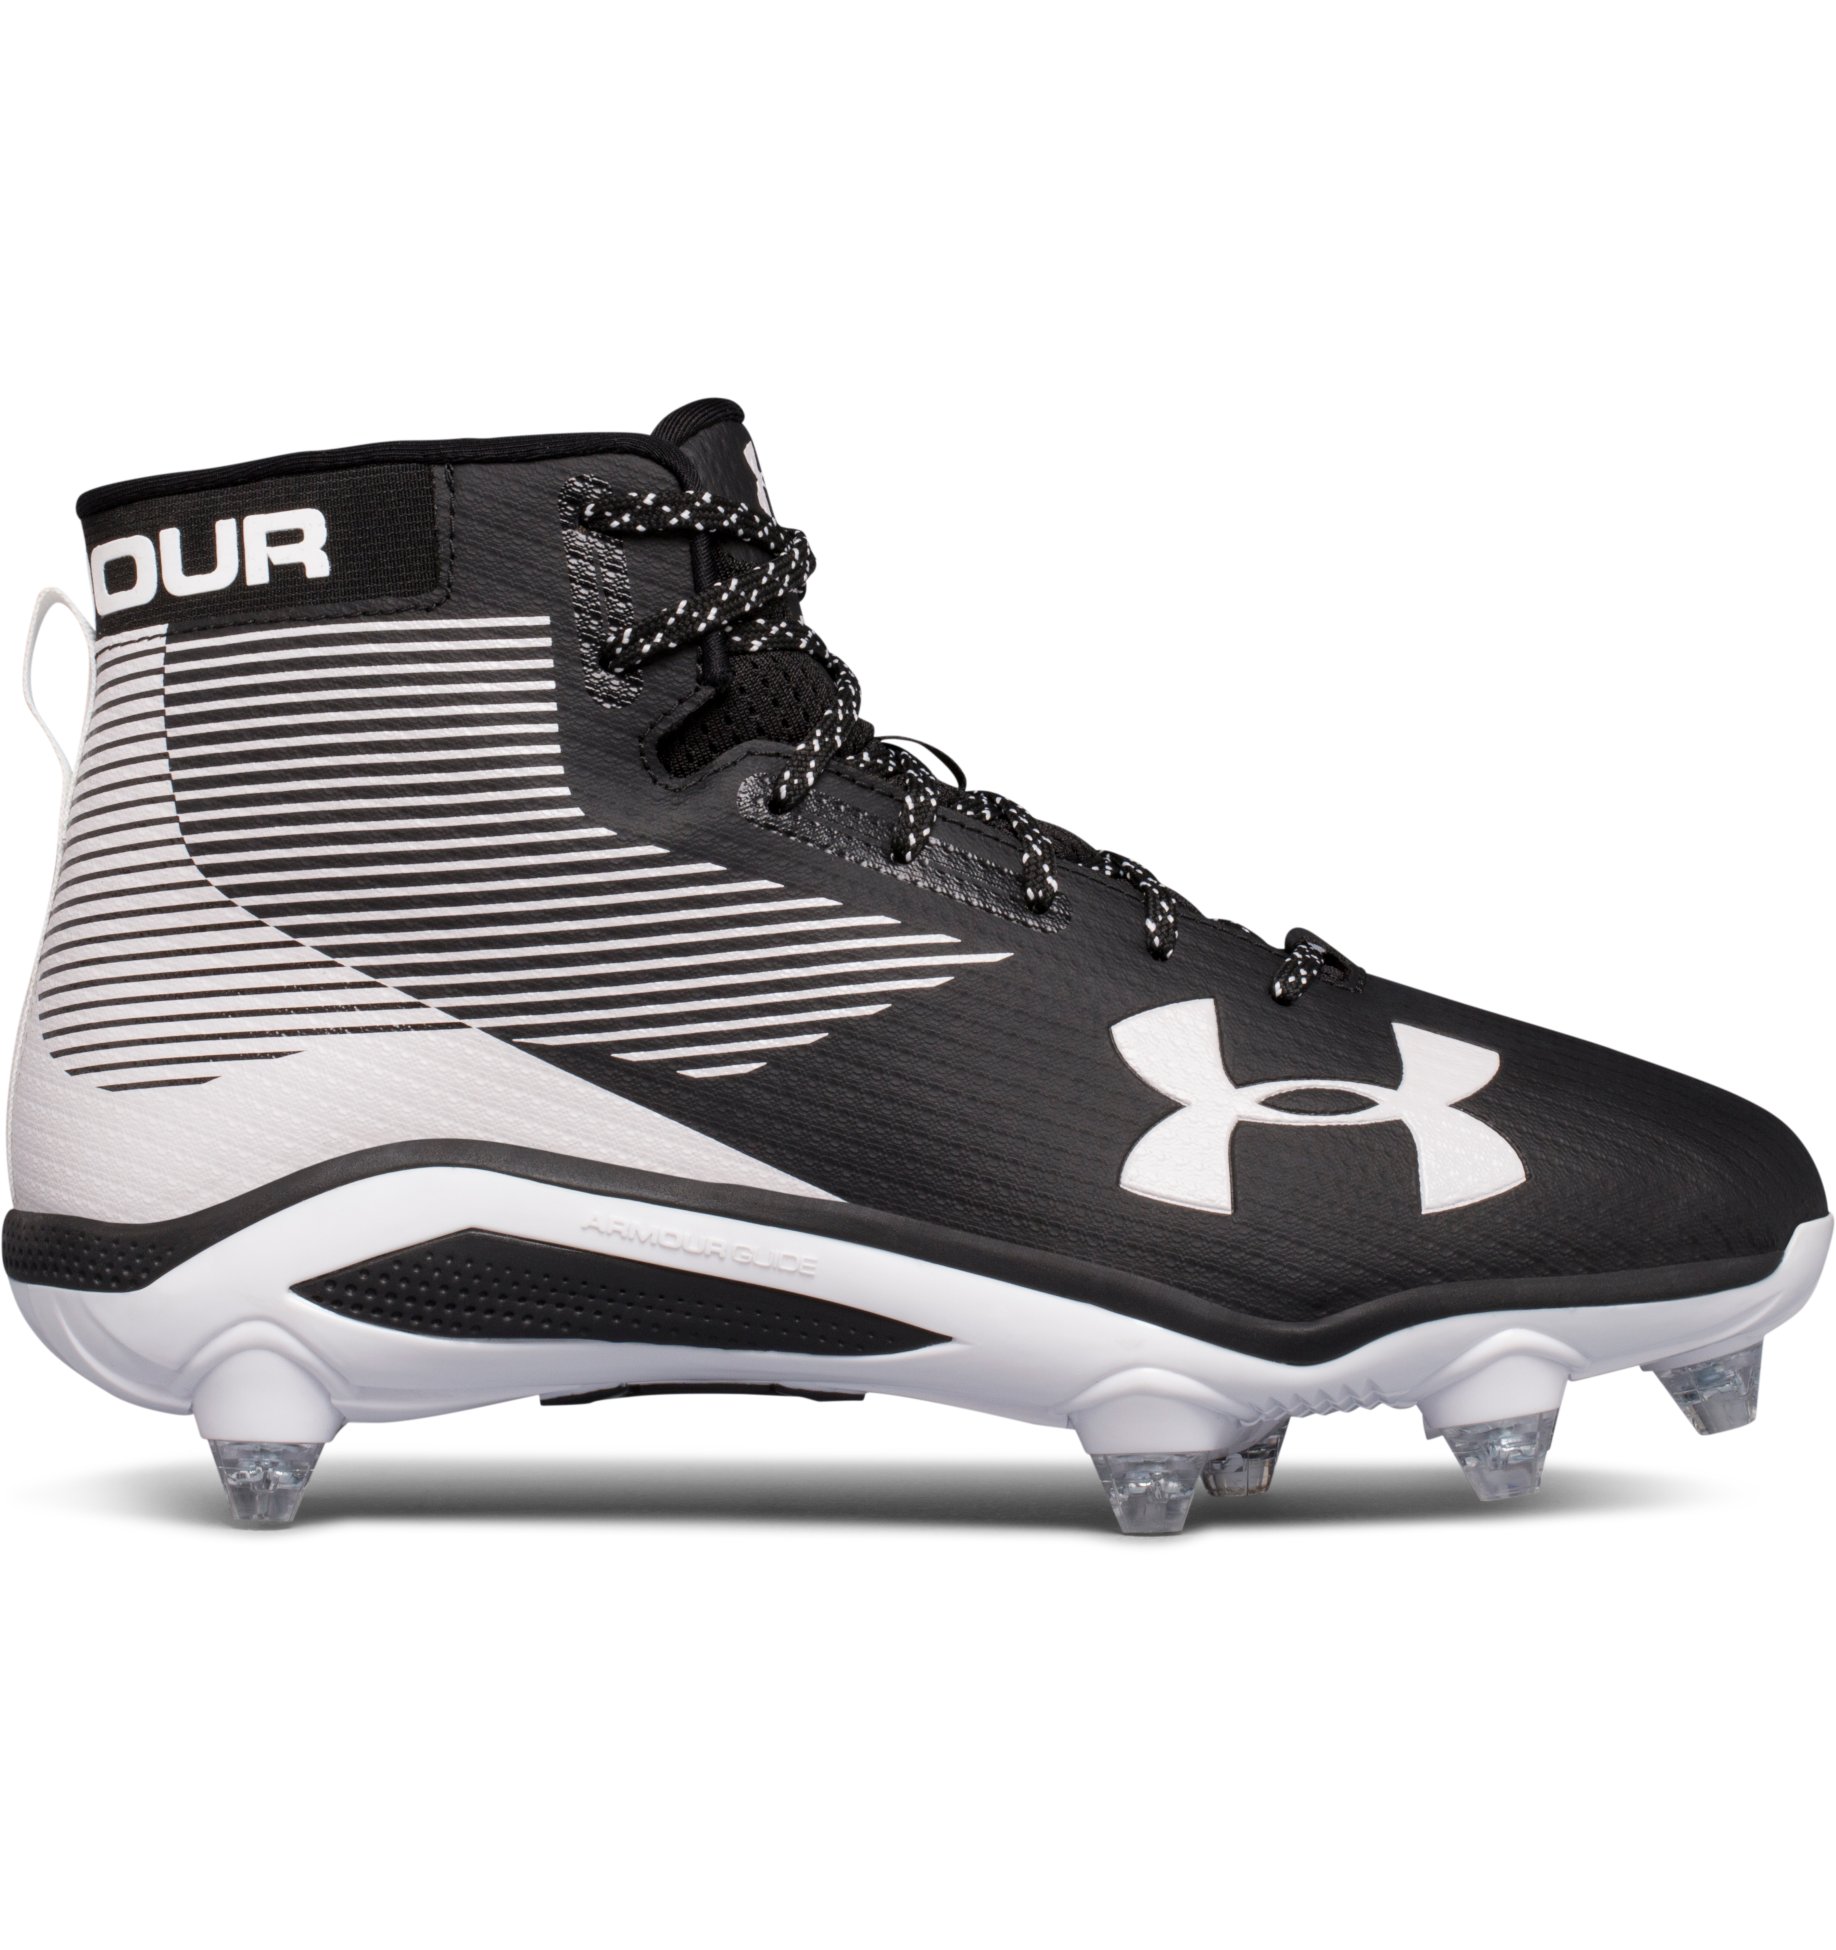 under armour banshee cleats